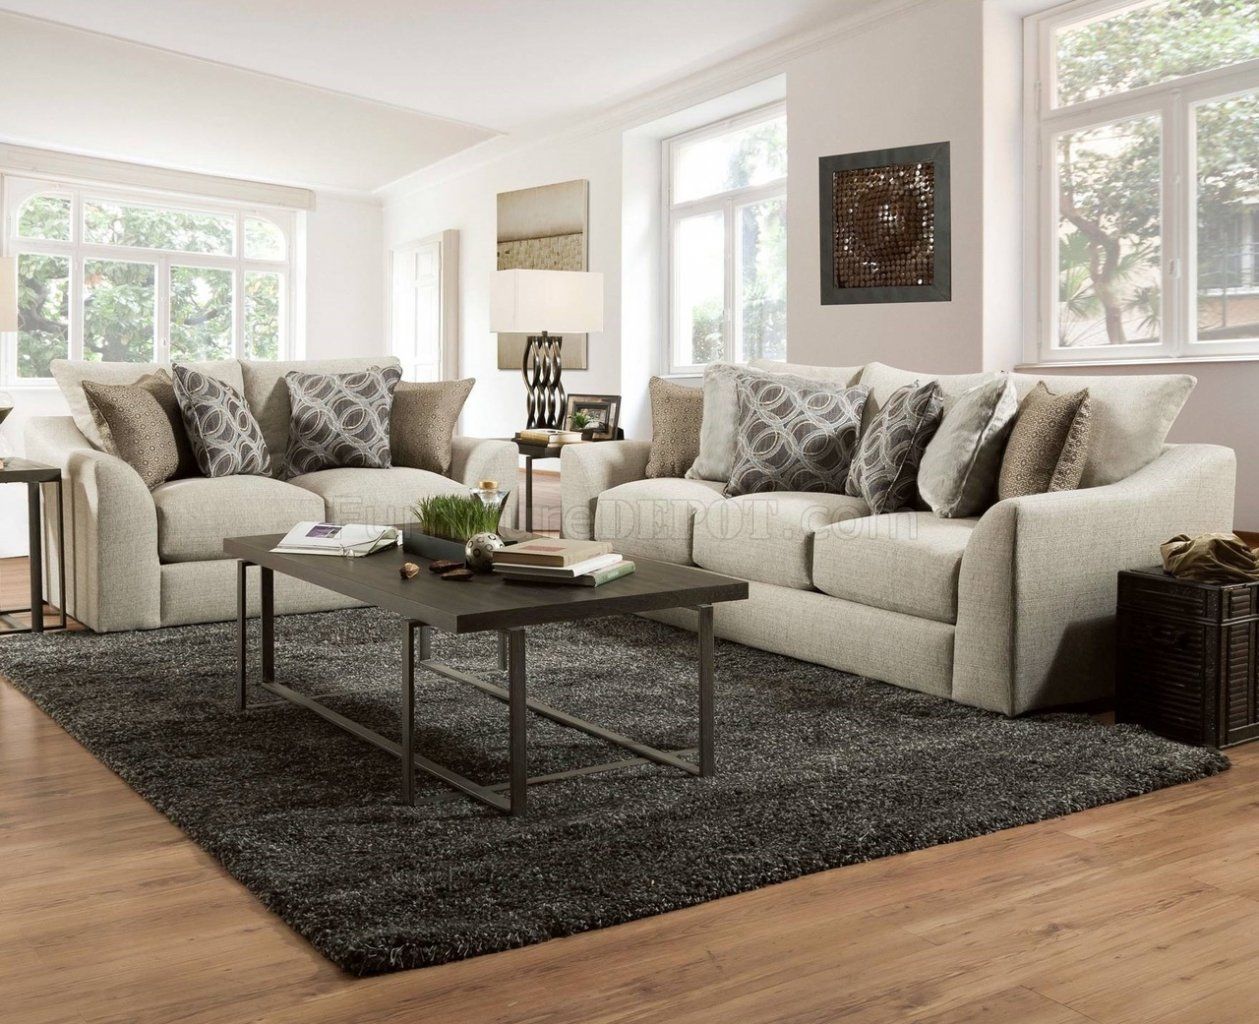 2 Piece Oversized Sofa & Loveseat Set In Espresso Micro Suede Within 110" Oversized Sofas (View 13 of 20)